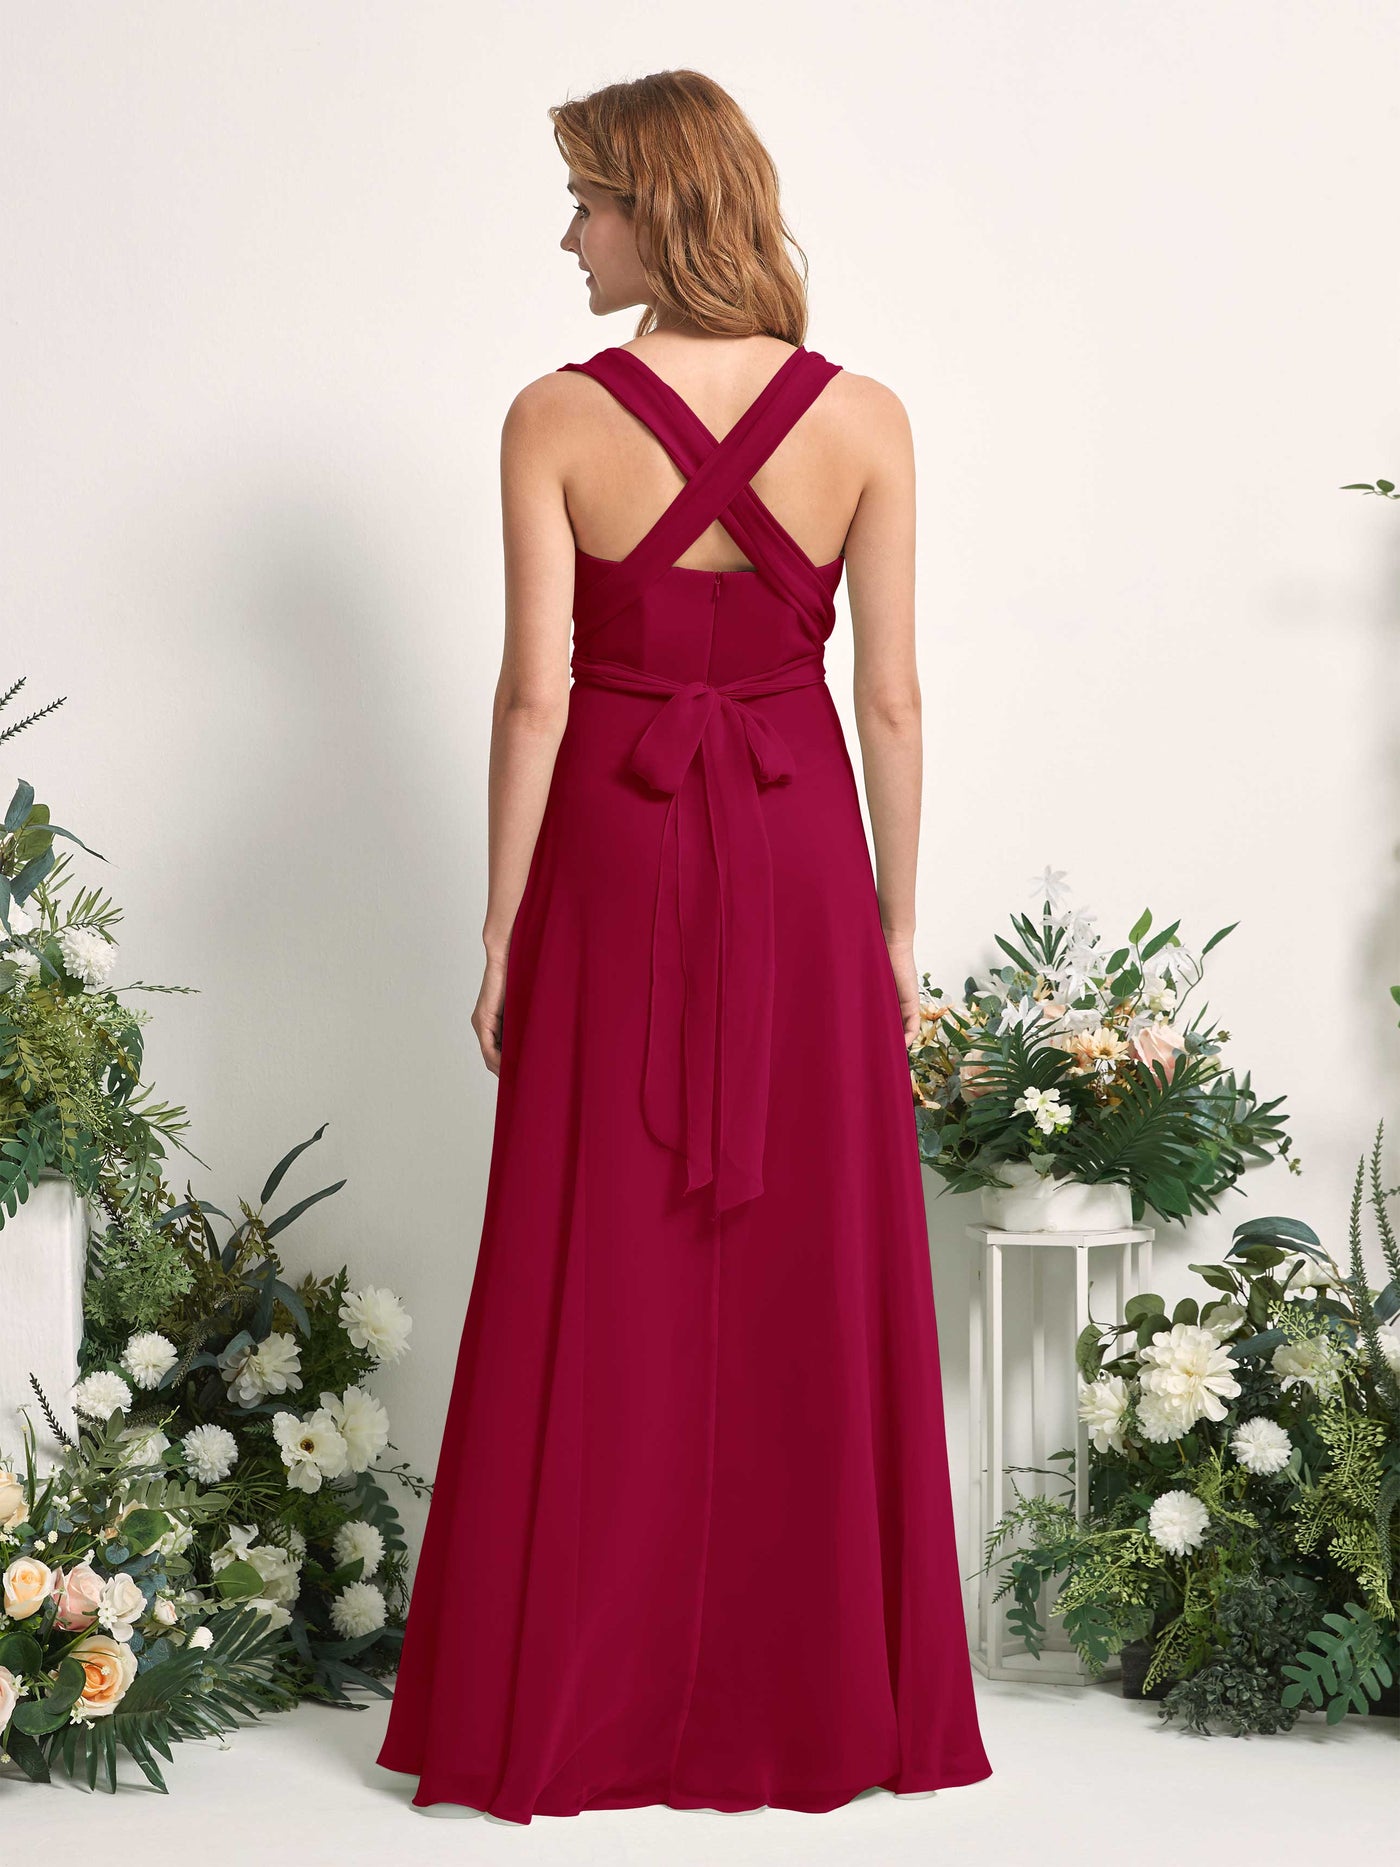 Jester Red Bridesmaid Dresses Bridesmaid Dress A-line Chiffon Halter Full Length Short Sleeves Wedding Party Dress (81226341)#color_jester-red